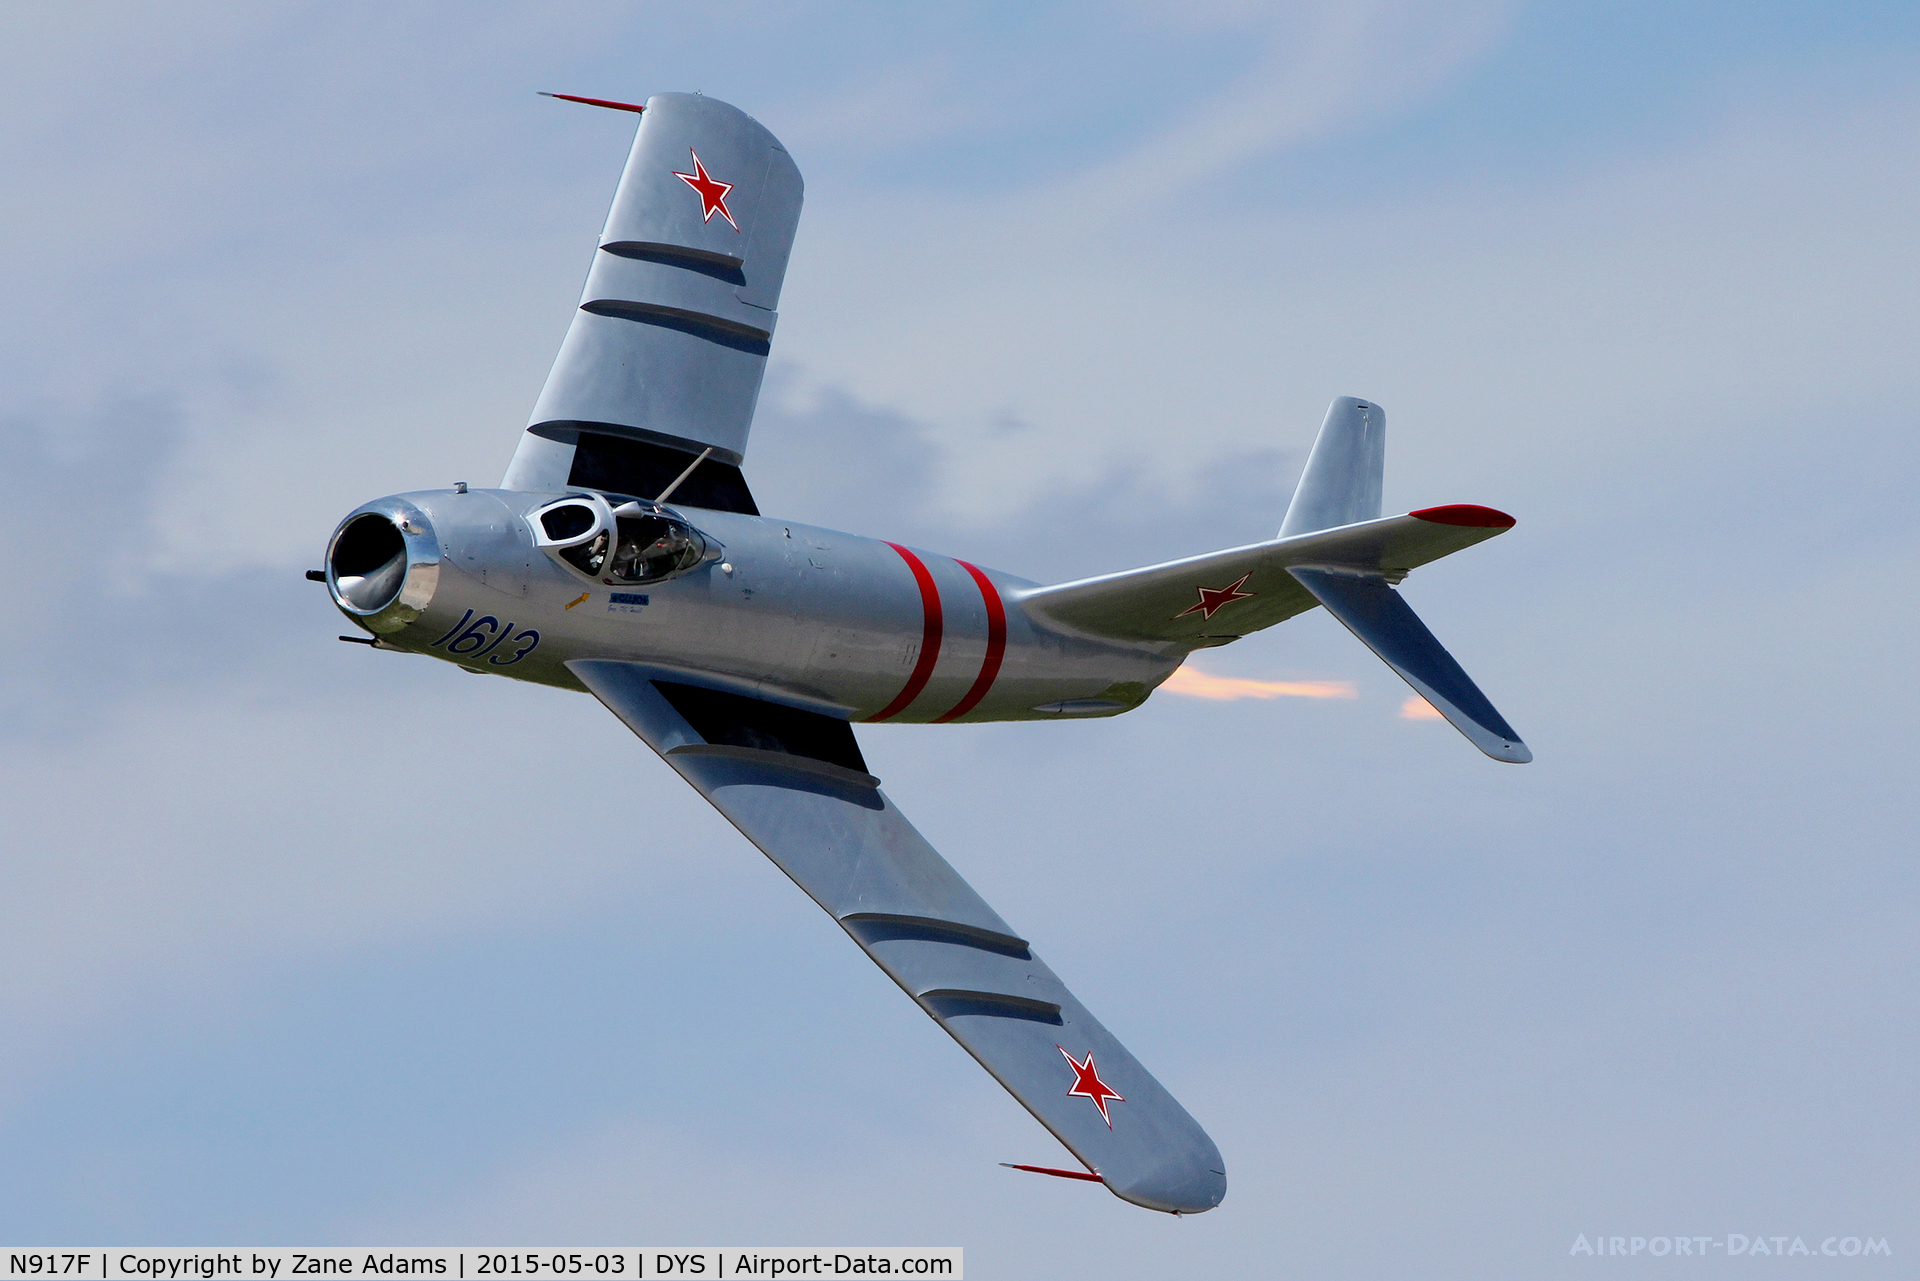 N917F, 1980 Mikoyan-Gurevich MiG-17 C/N 1C1613, At the 2014 Big Country Airshow - Dyess AFB, TX